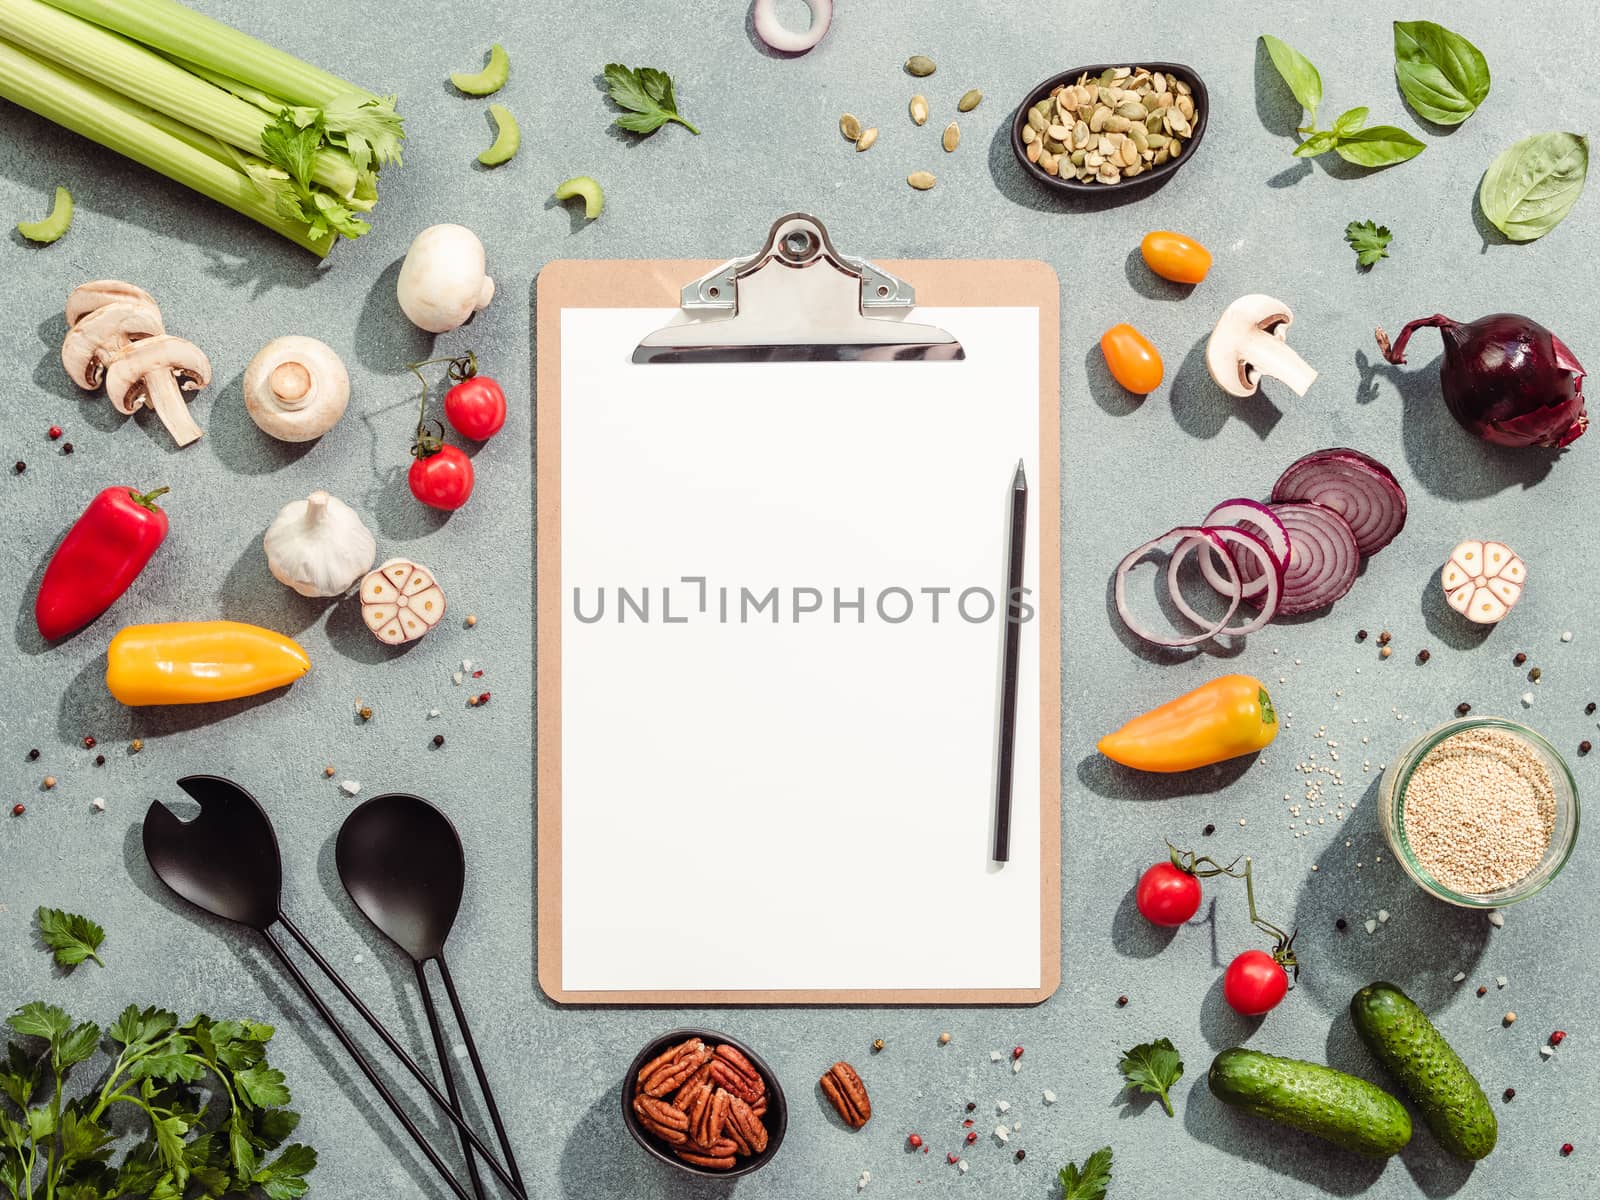 Food ingredients, salad serving utensils and clipboard with white paper sheet. Various of vegetarian cooking ingredients on gray background.Recipe book concept.Copy space for text.Top view or flat lay